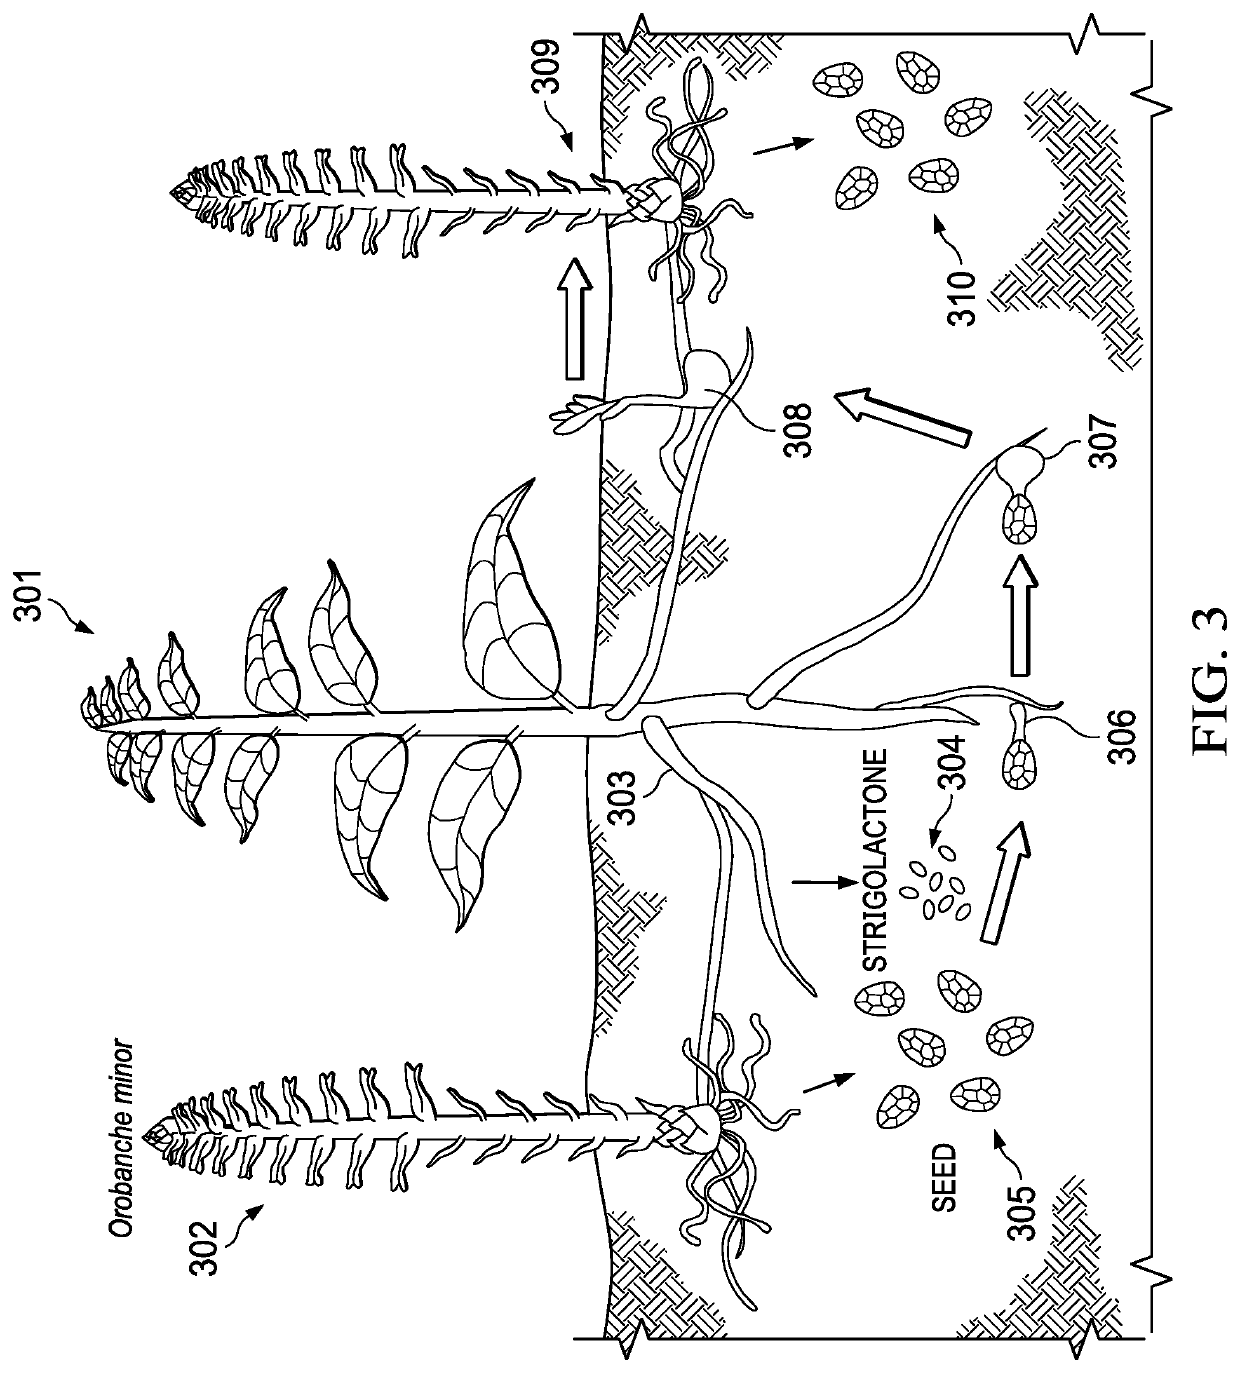 Plant growth promoter with strigolactones regulation activities